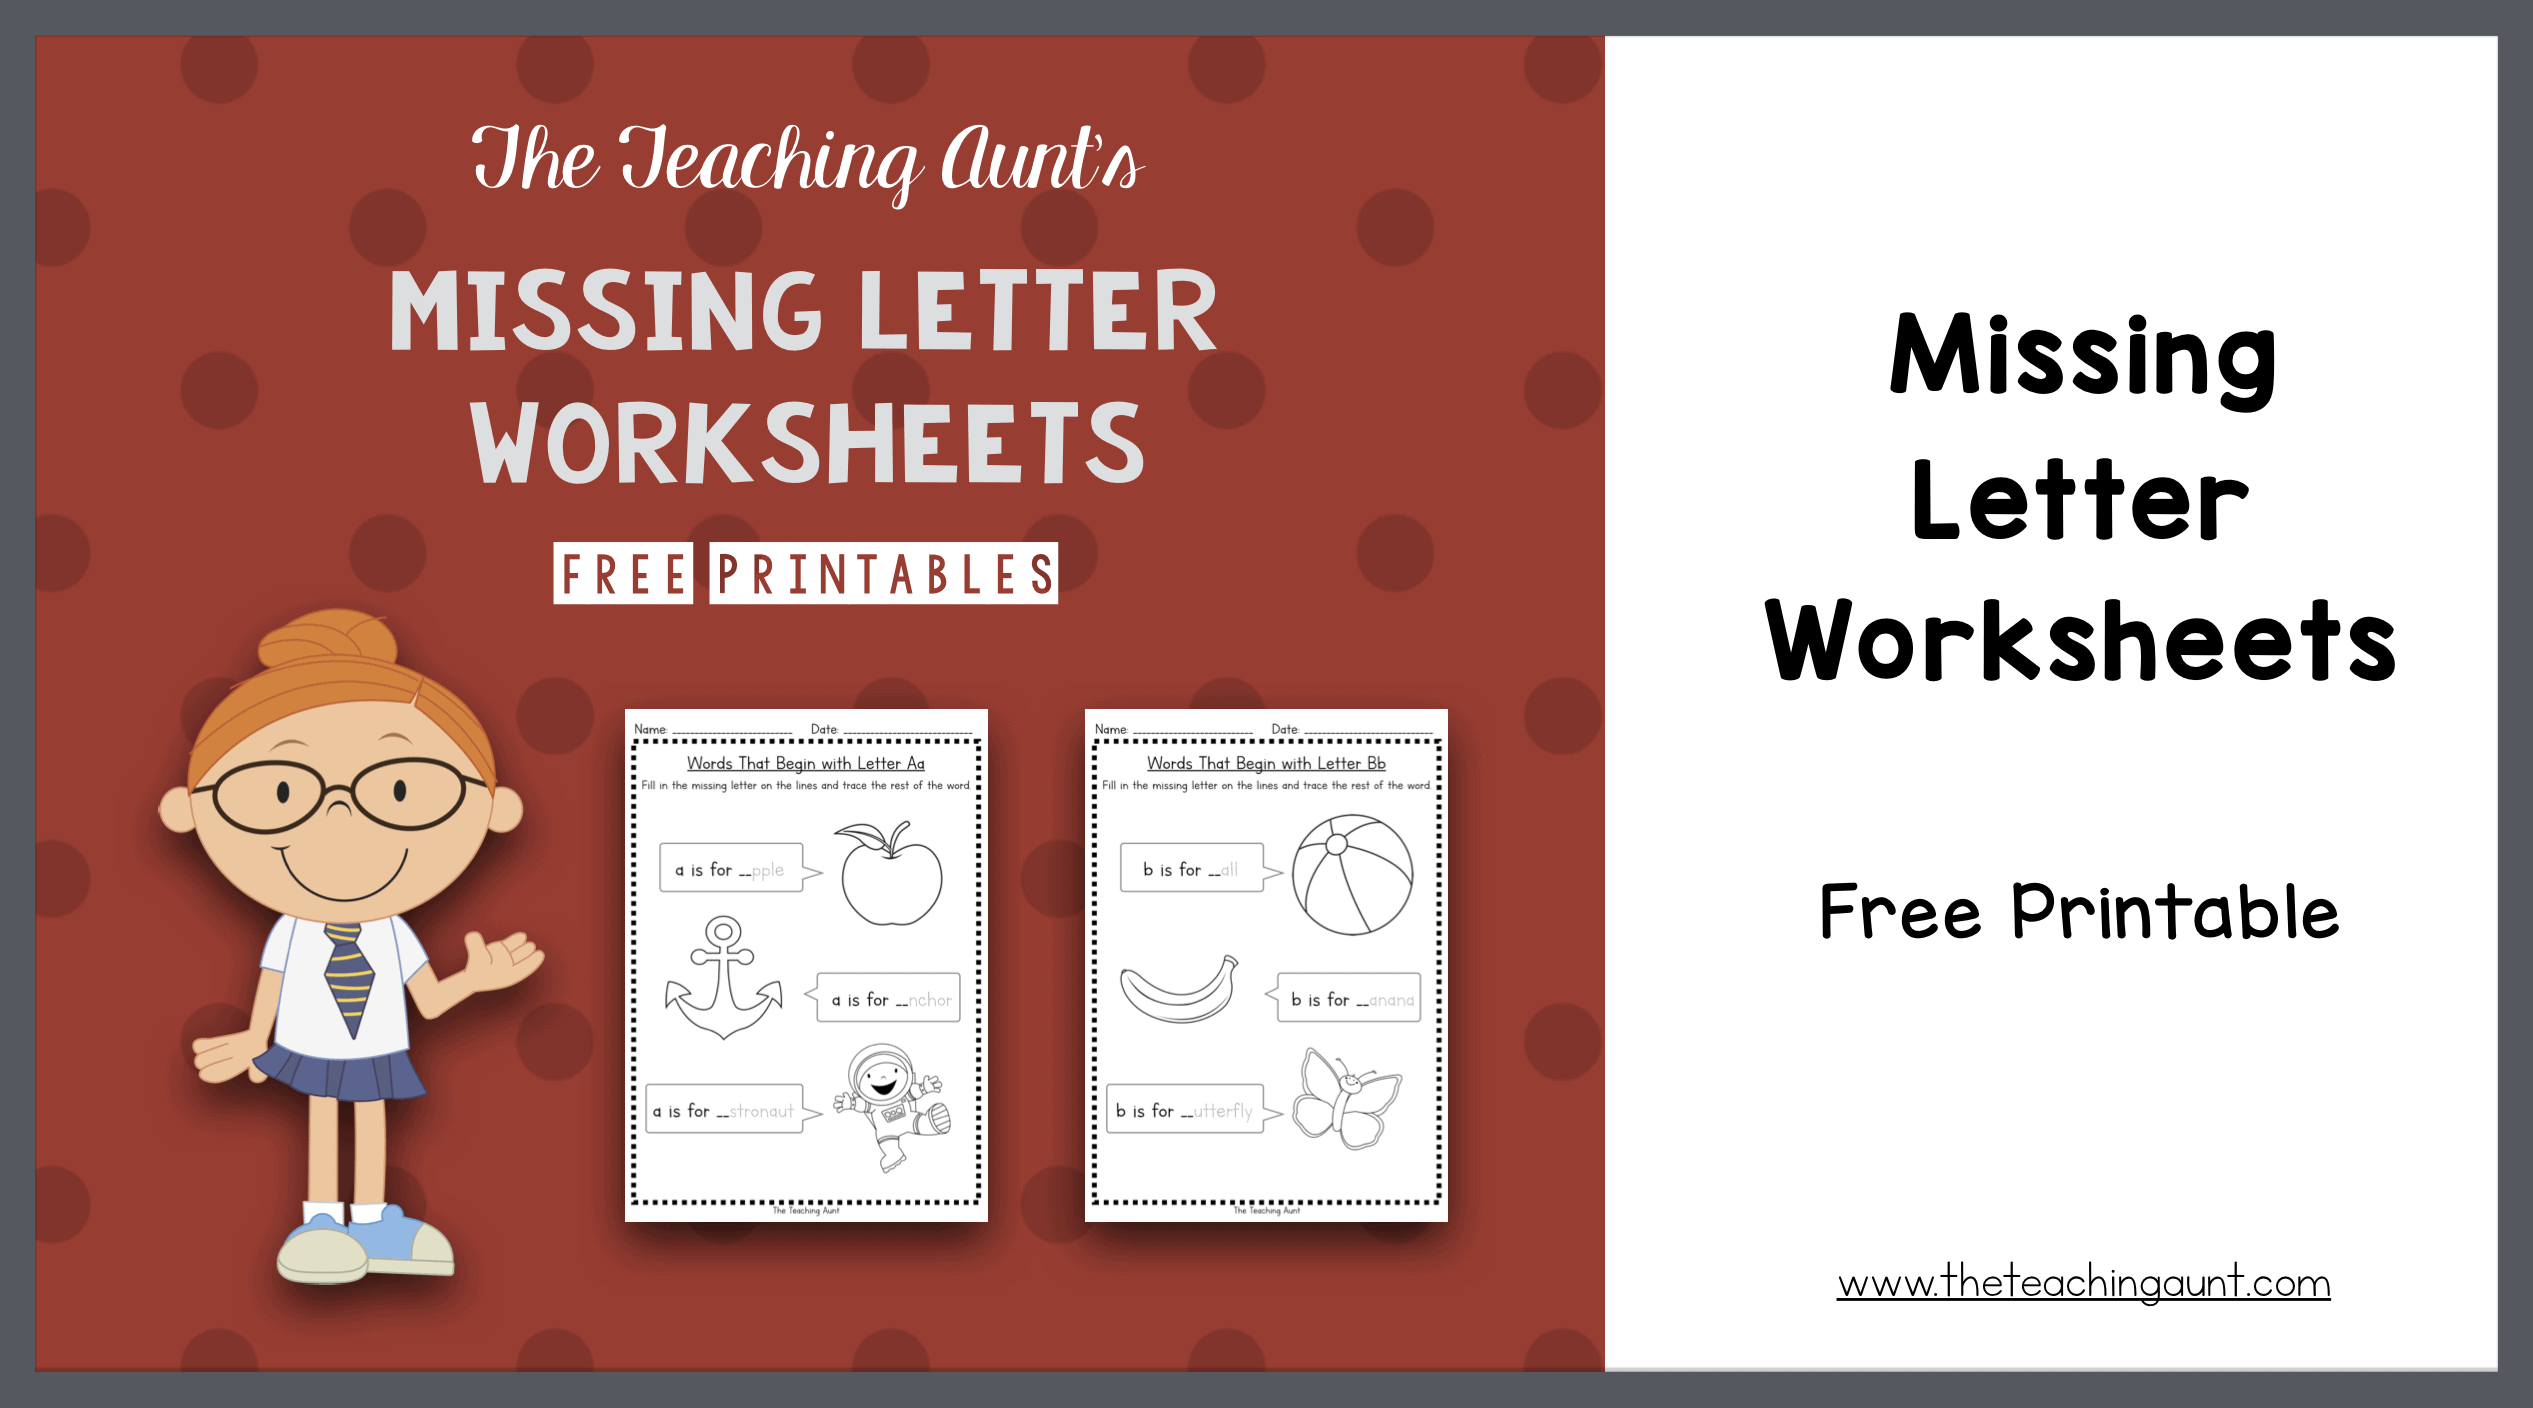 Missing Beginning Letter Worksheets Free Printable from The Teaching Aunt